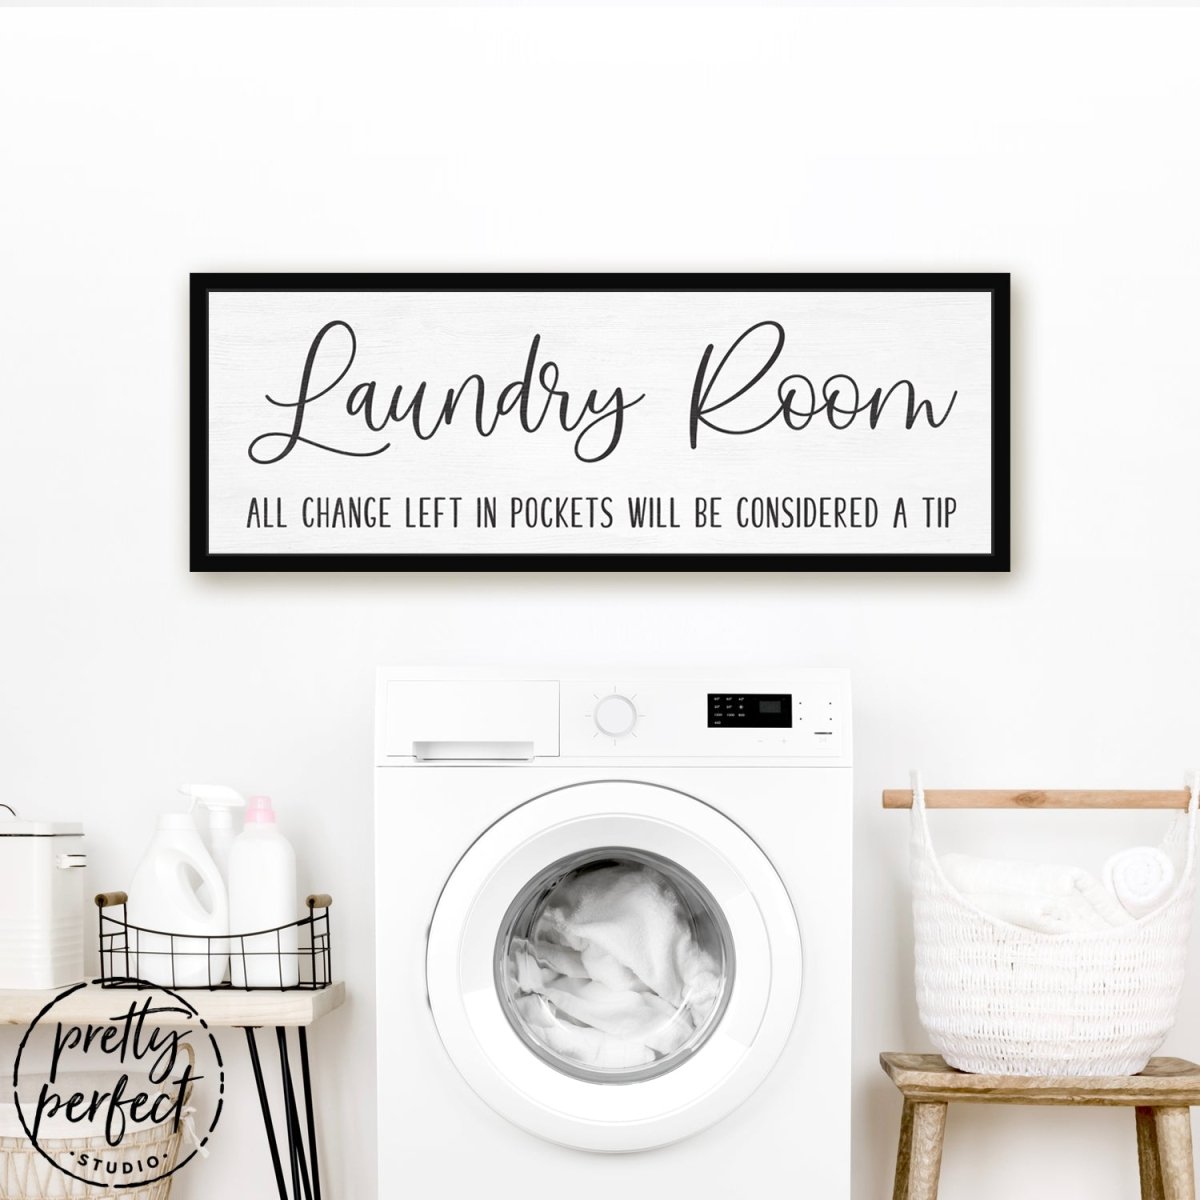 Laundry Room Change Sign Hanging Above Washer In Laundry Room - Pretty Perfect Studio